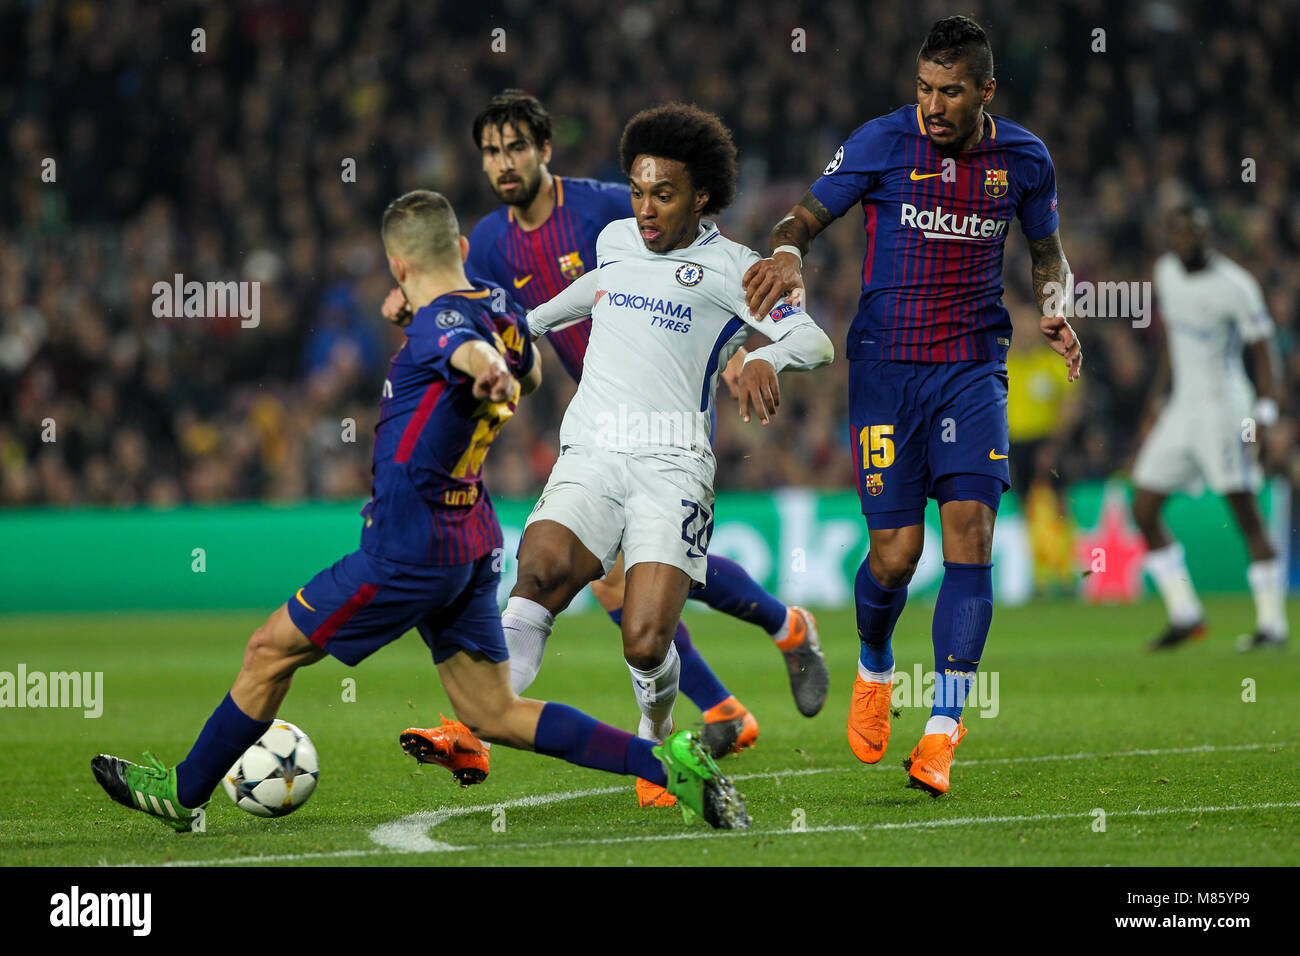 Barcelona, Spain. 14th March 2018; Willian, Chelsea FC player in action with Paulinho, #15 player of FC Barcelona and Andre Gomes, #21 player of FC Barcelona during the 2017/2018 UEFA Champions League Round of 16 game between FC Barcelona and Chelsea at Camp Nou stadium on March 14, 2018 in Barcelona, Spain. Credit: UKKO Images/Alamy Live News Stock Photo